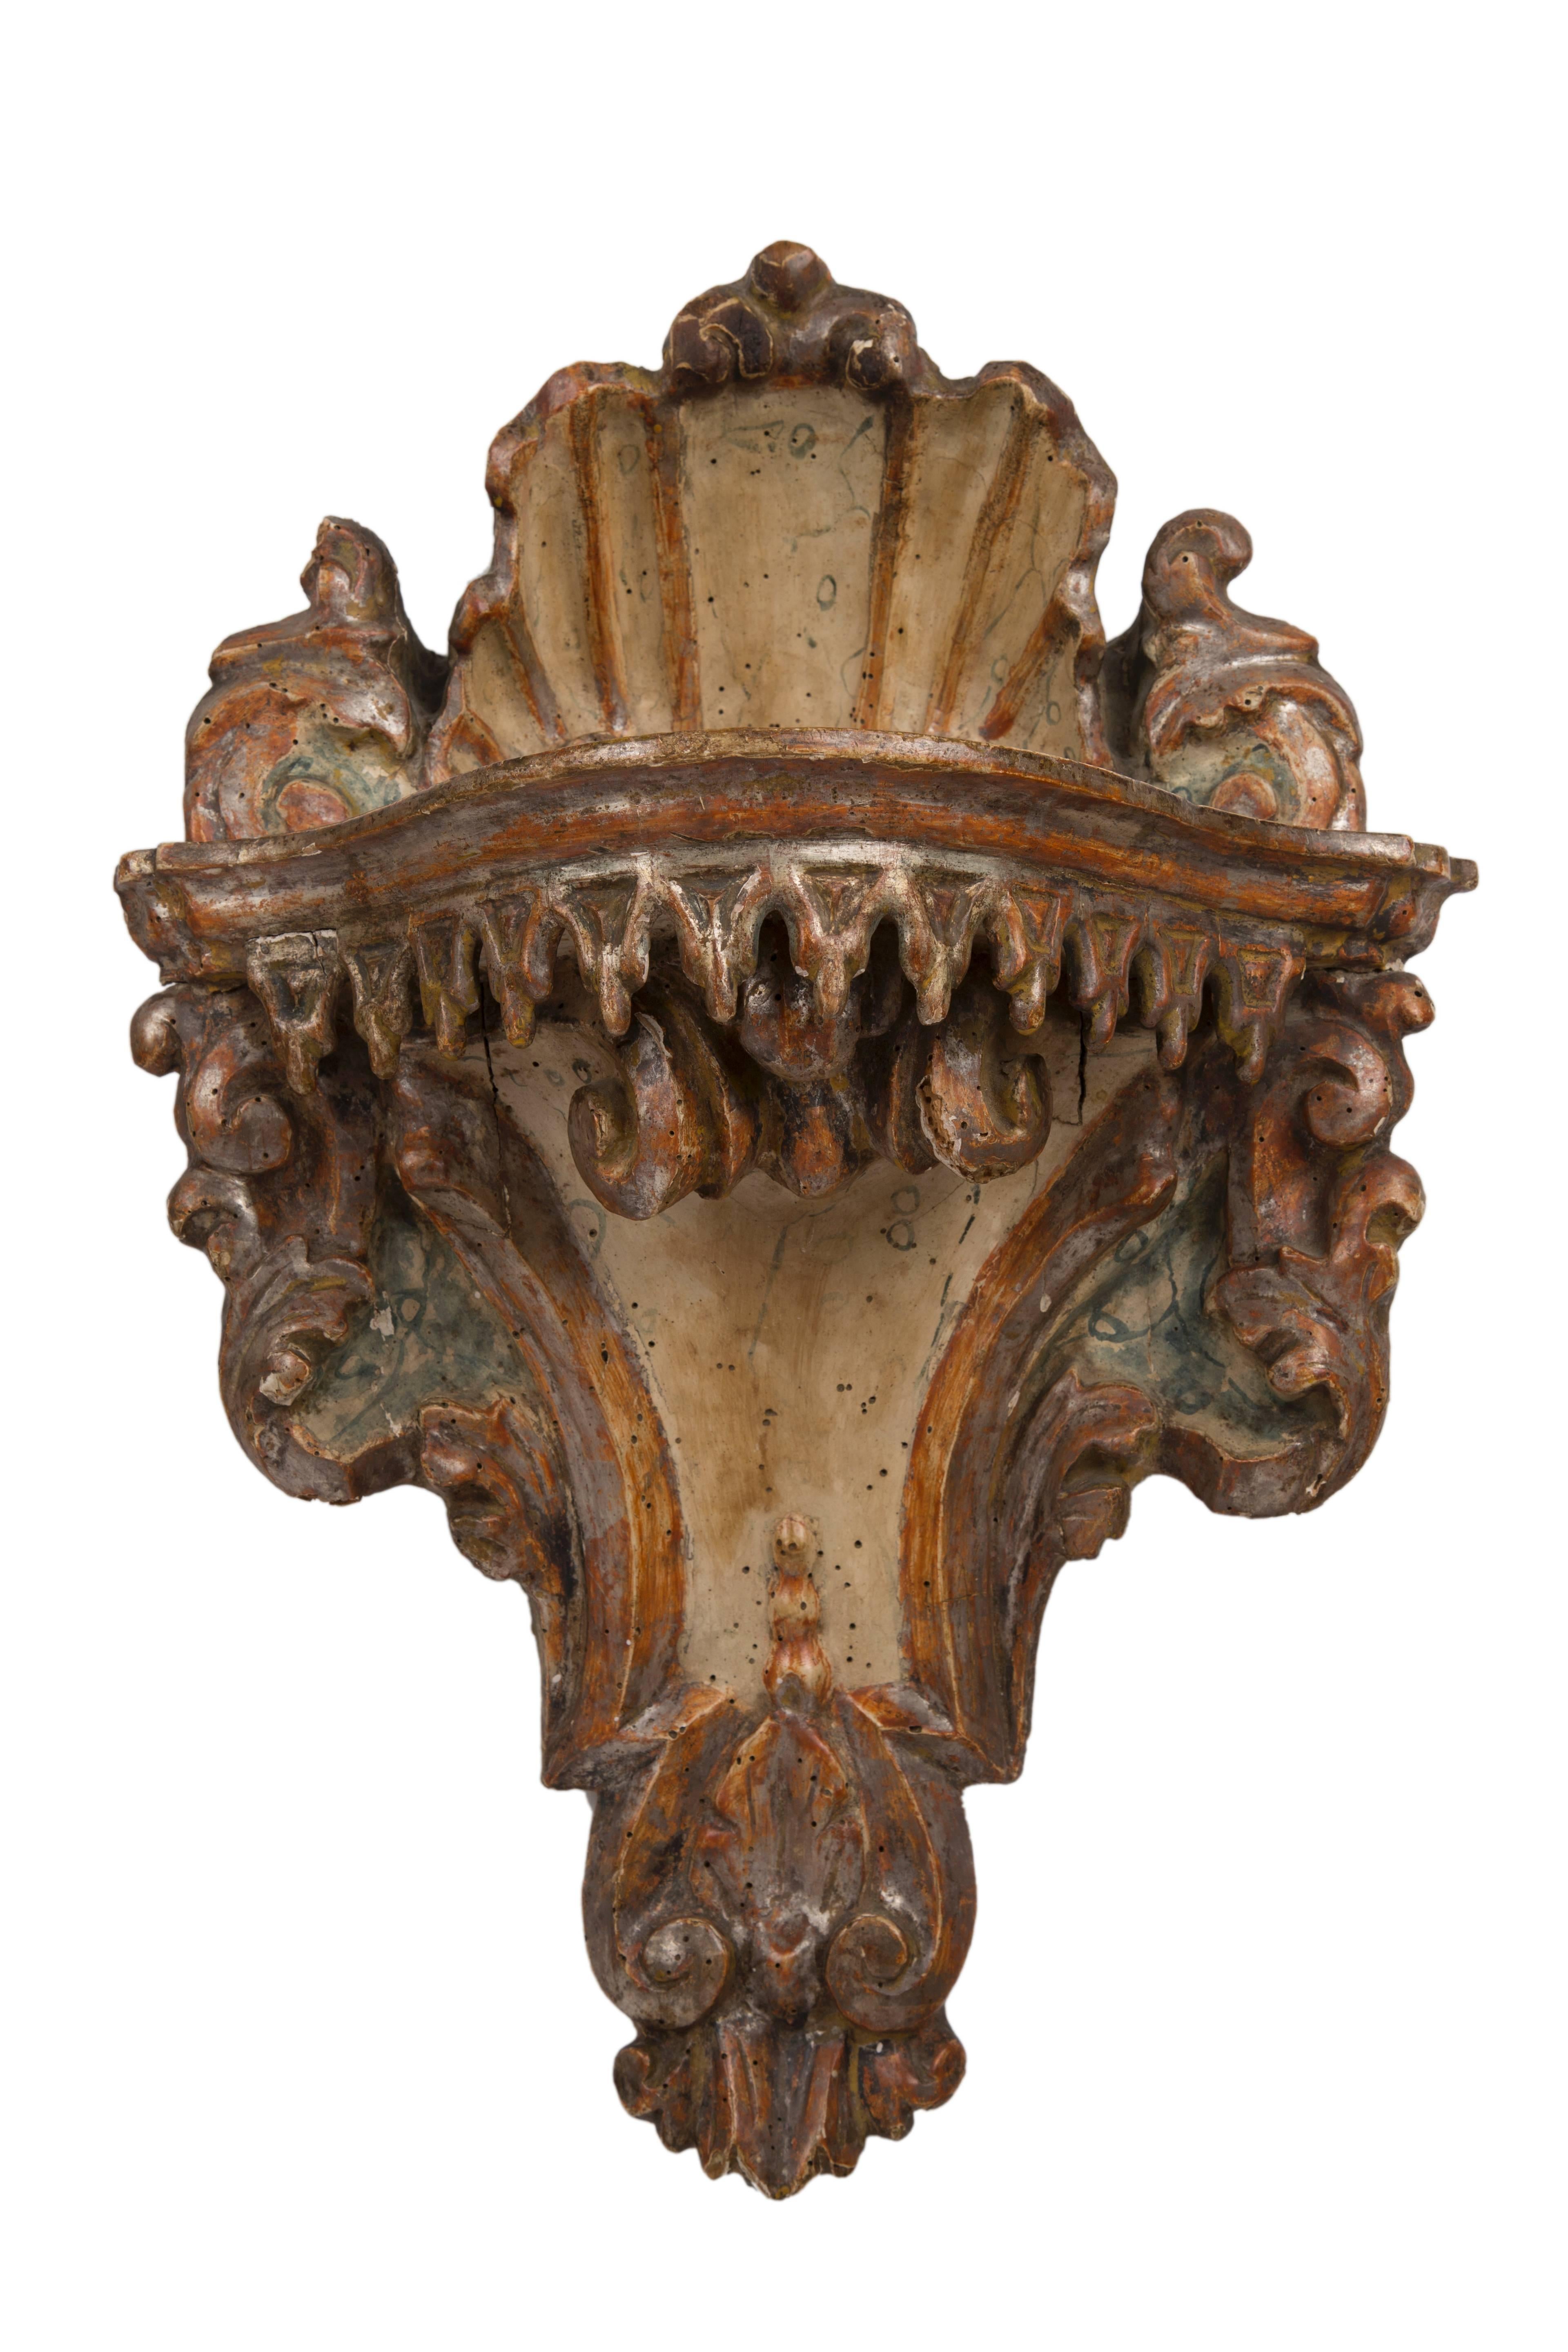 Rare pair of wall brackets, highly stylized lacquered carving.
Italian, 18th century.